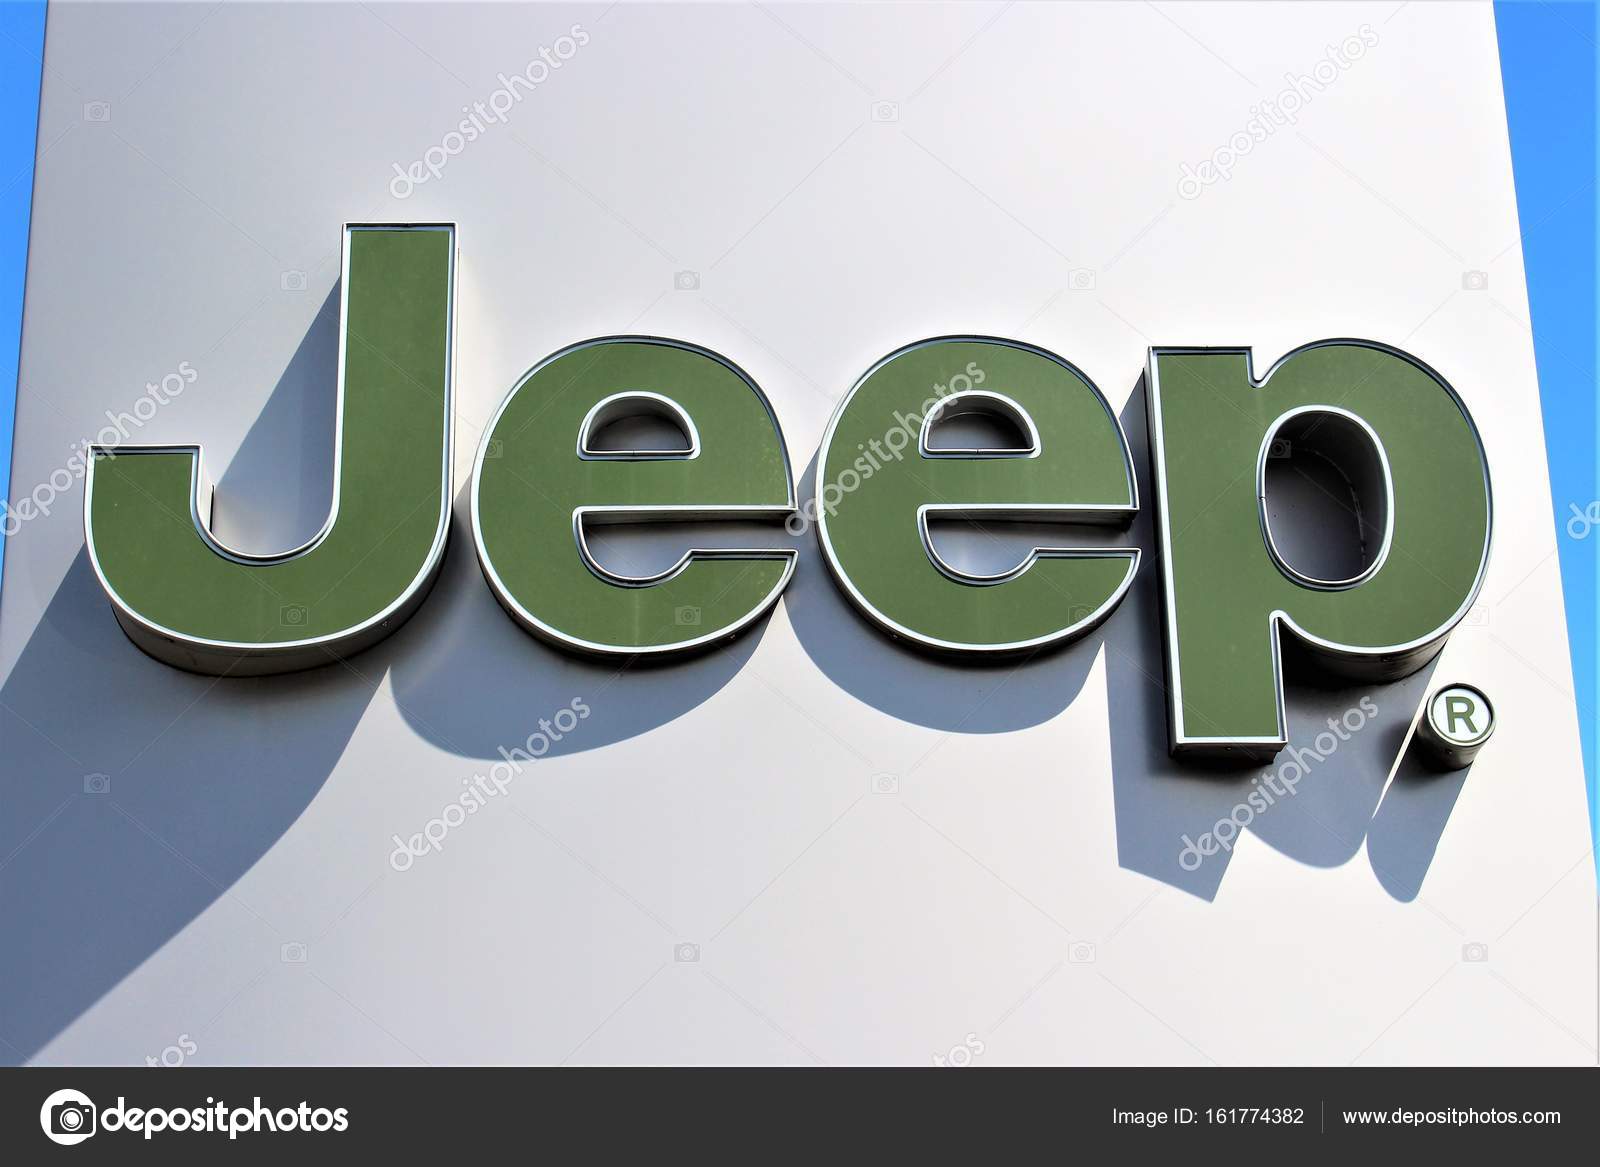 Jeep and High Vehicle Models